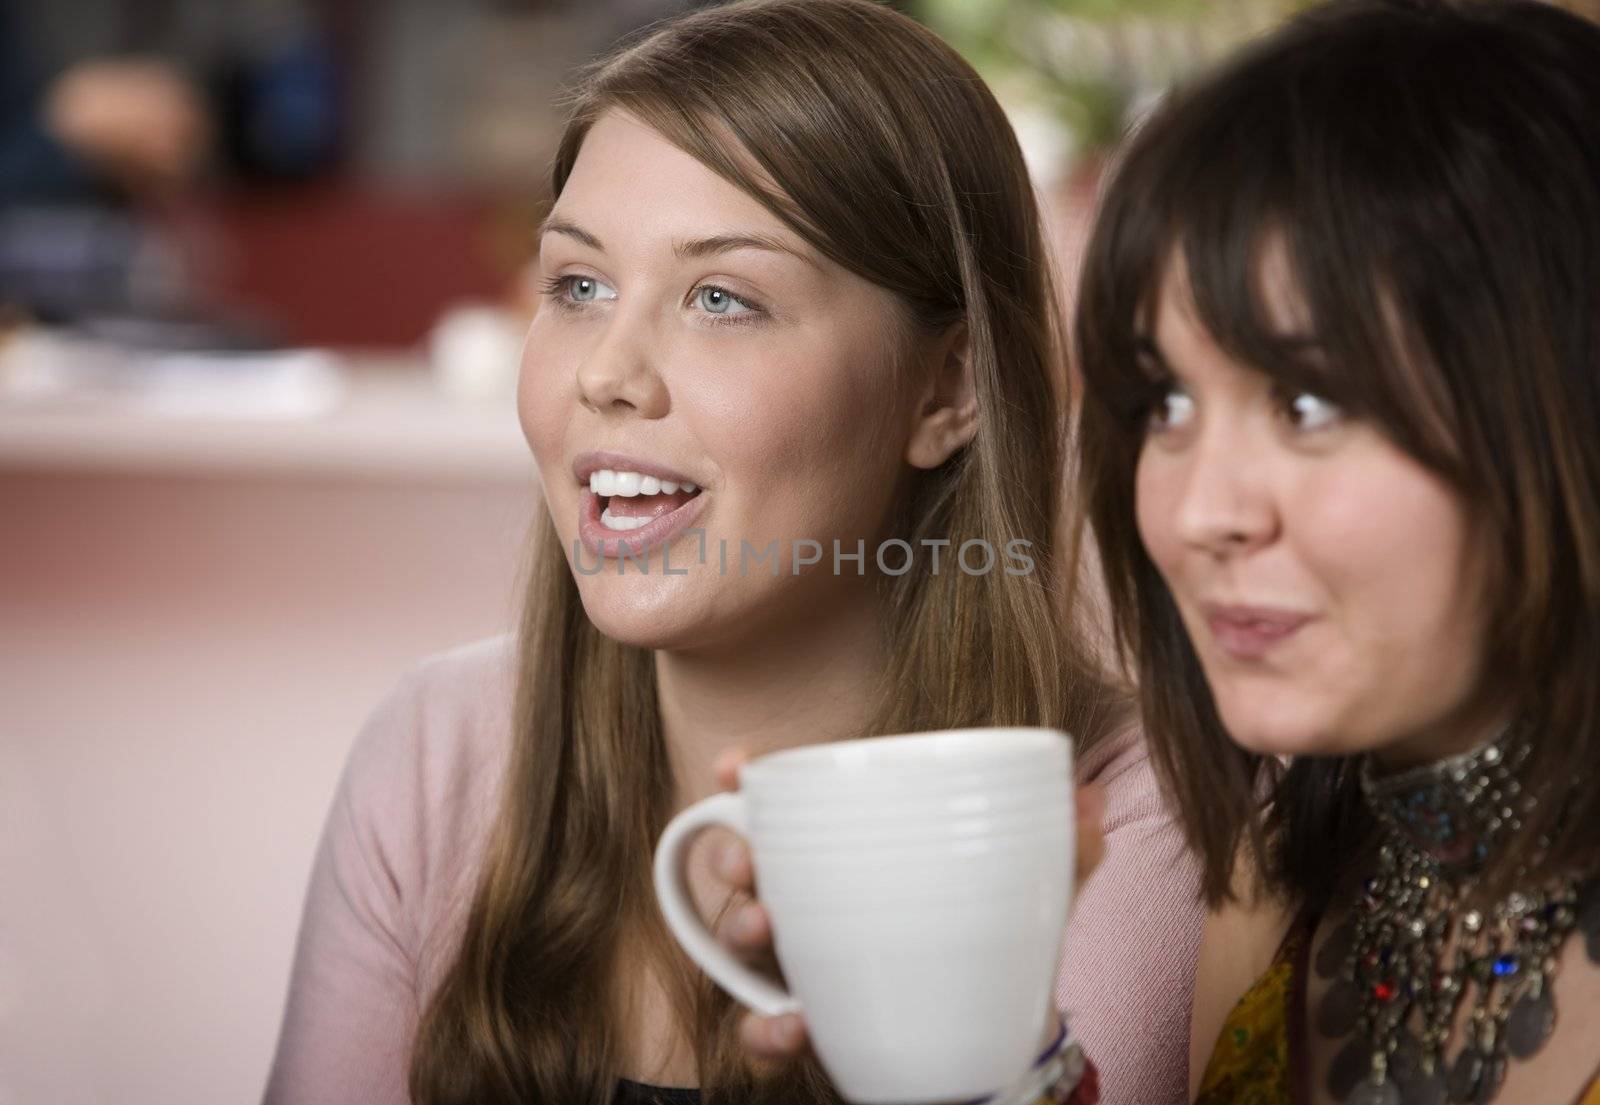 Two pretty young women in a coffee house